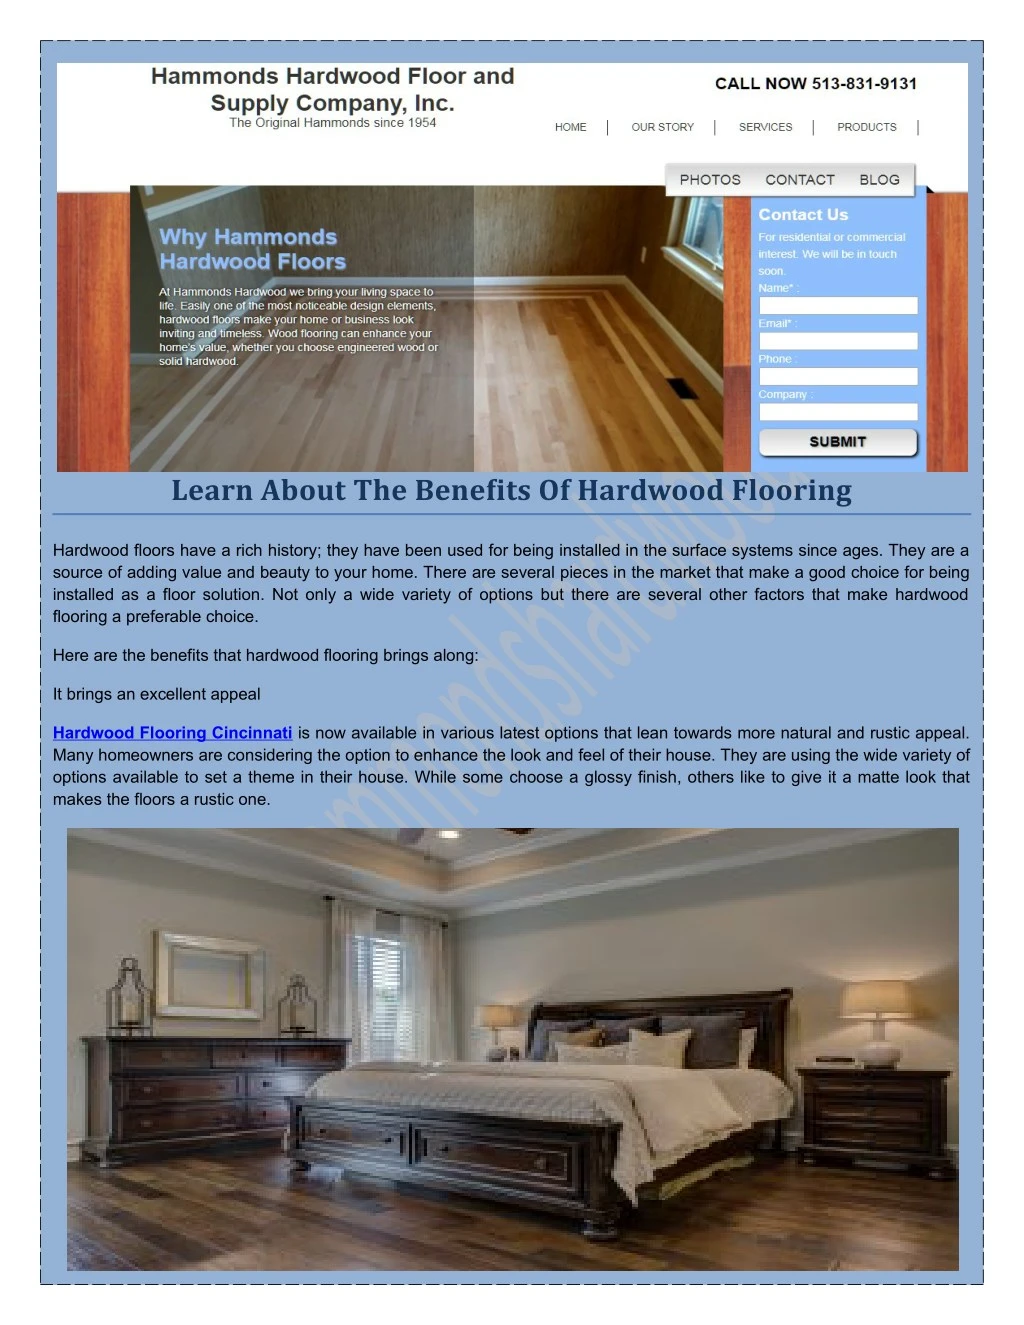 learn about the benefits of hardwood flooring